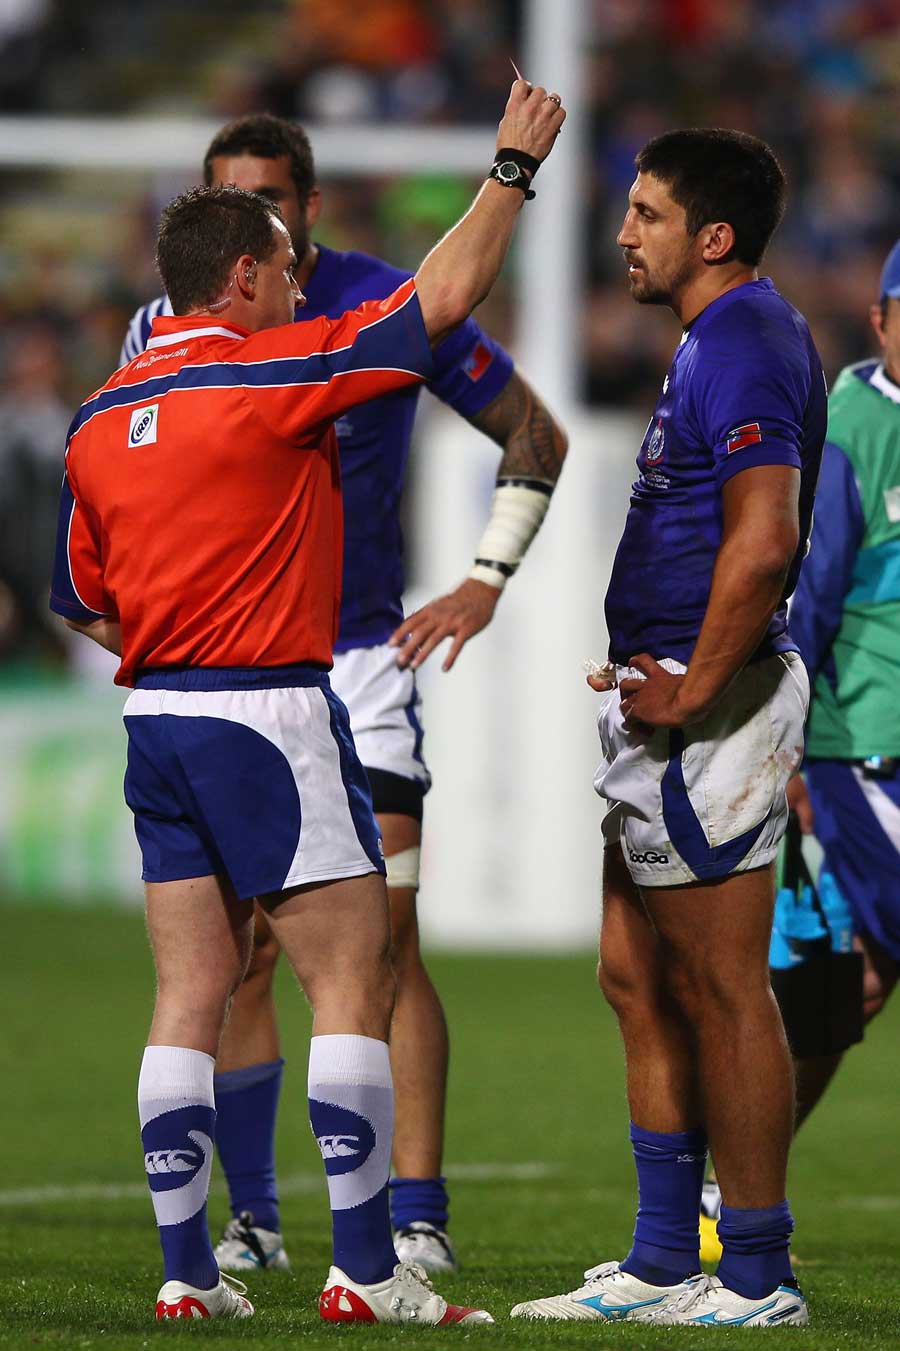 Samoa's Paul Williams receives his red card, Samoa v South Africa, Rugby World Cup, North Harbour Stadium, Auckland, New Zealand, September 30, 2011